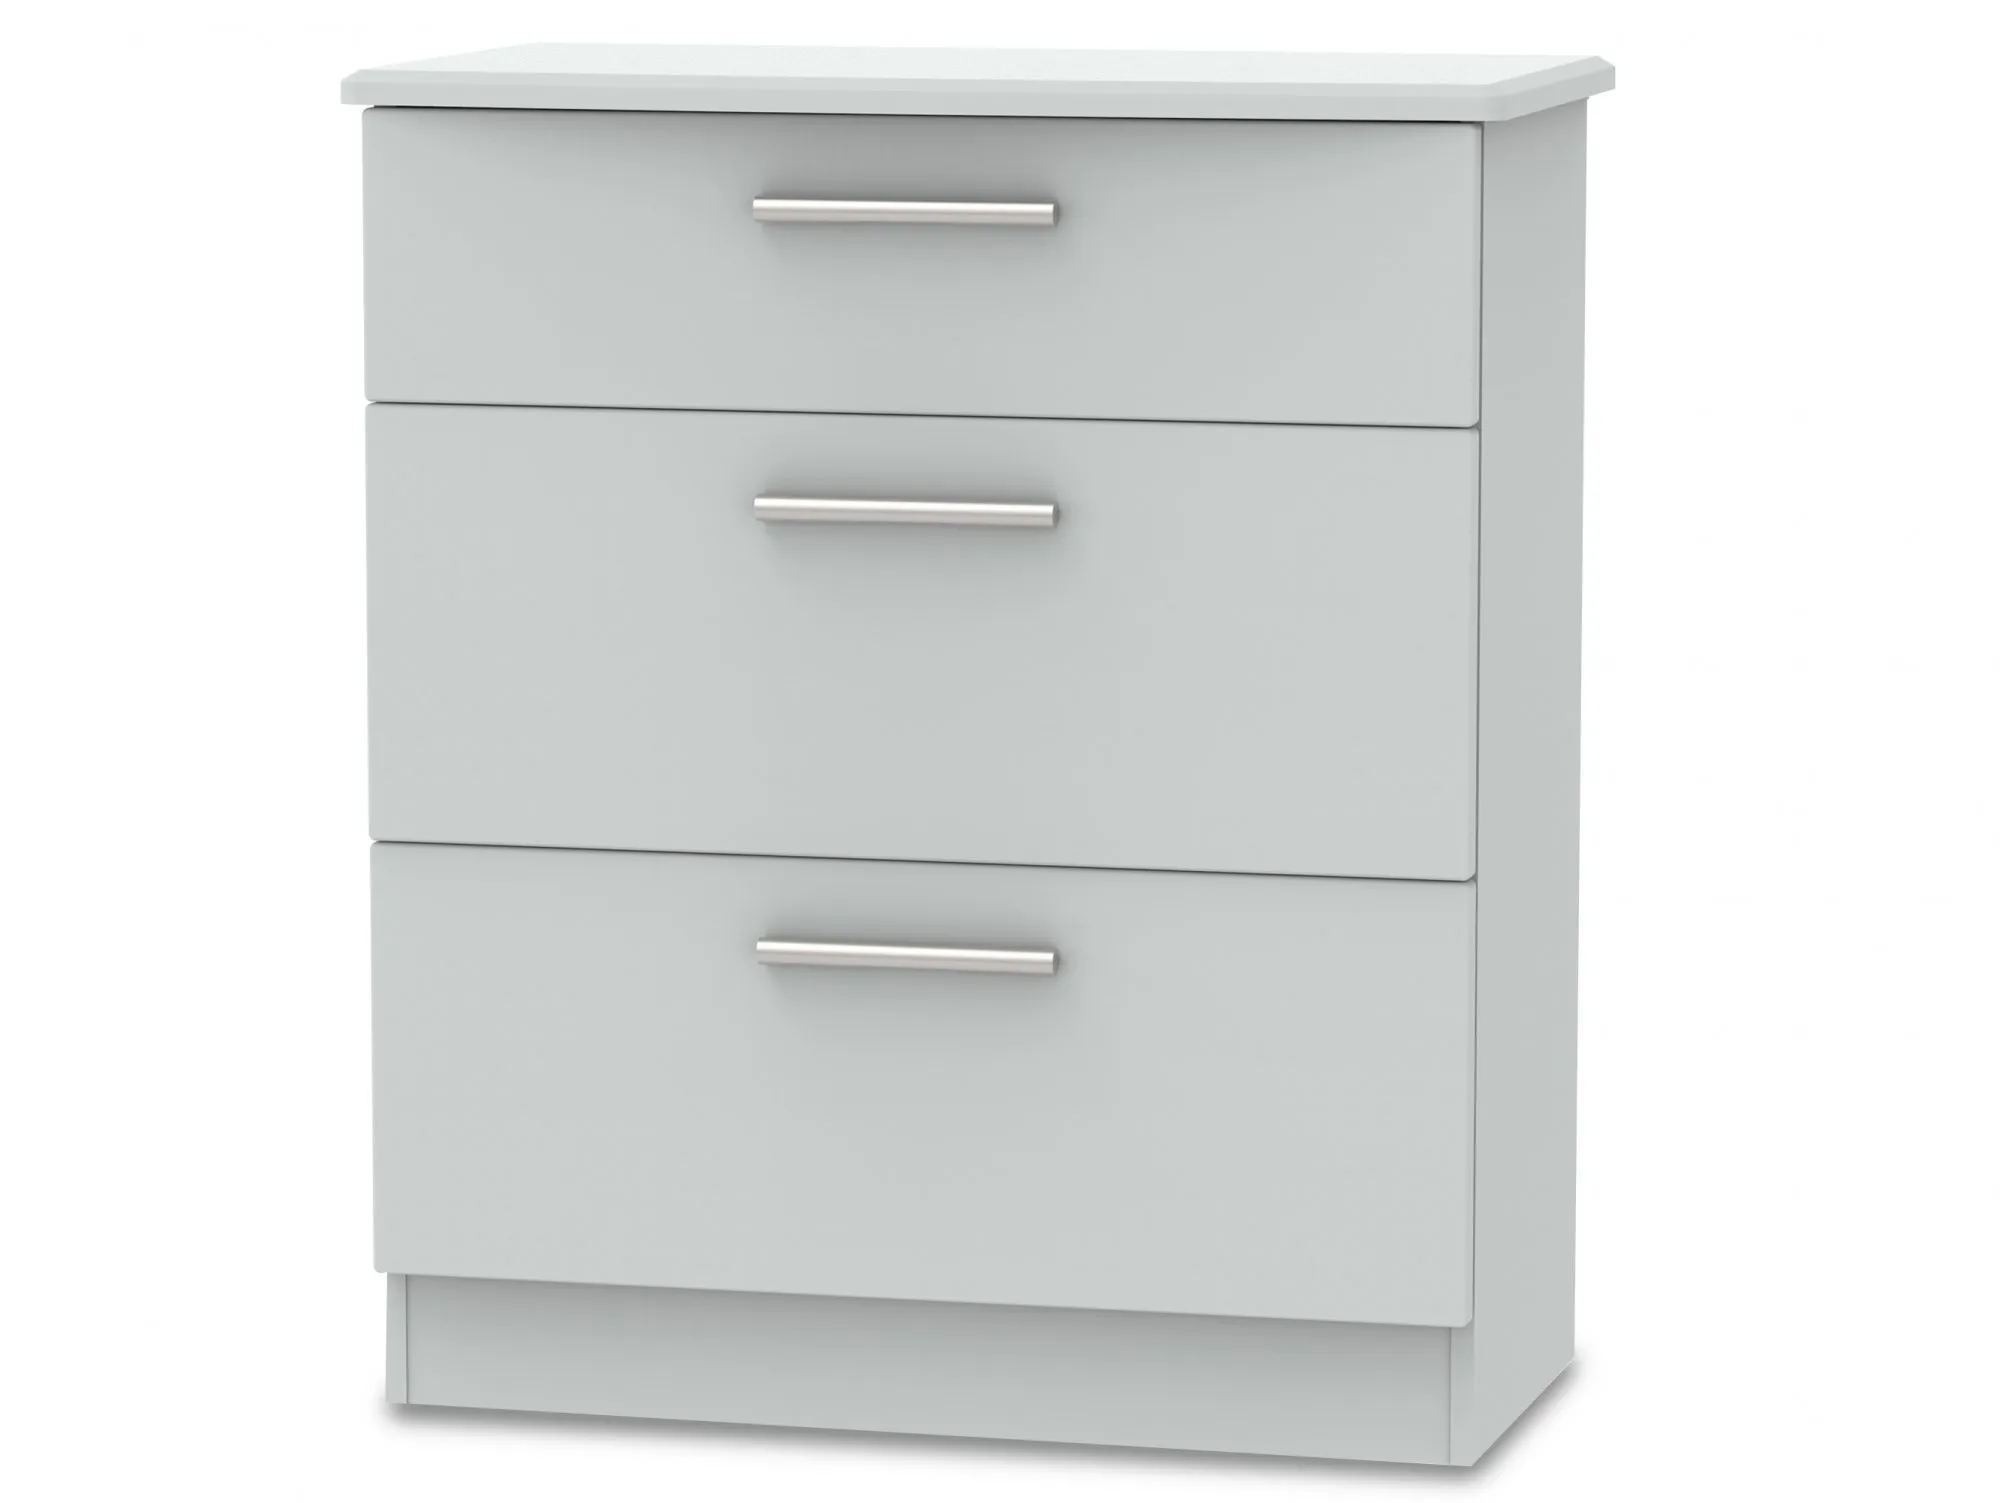 Welcome Welcome Knightsbridge Matt Grey 3 Drawer Deep Low Chest of Drawers (Assembled)